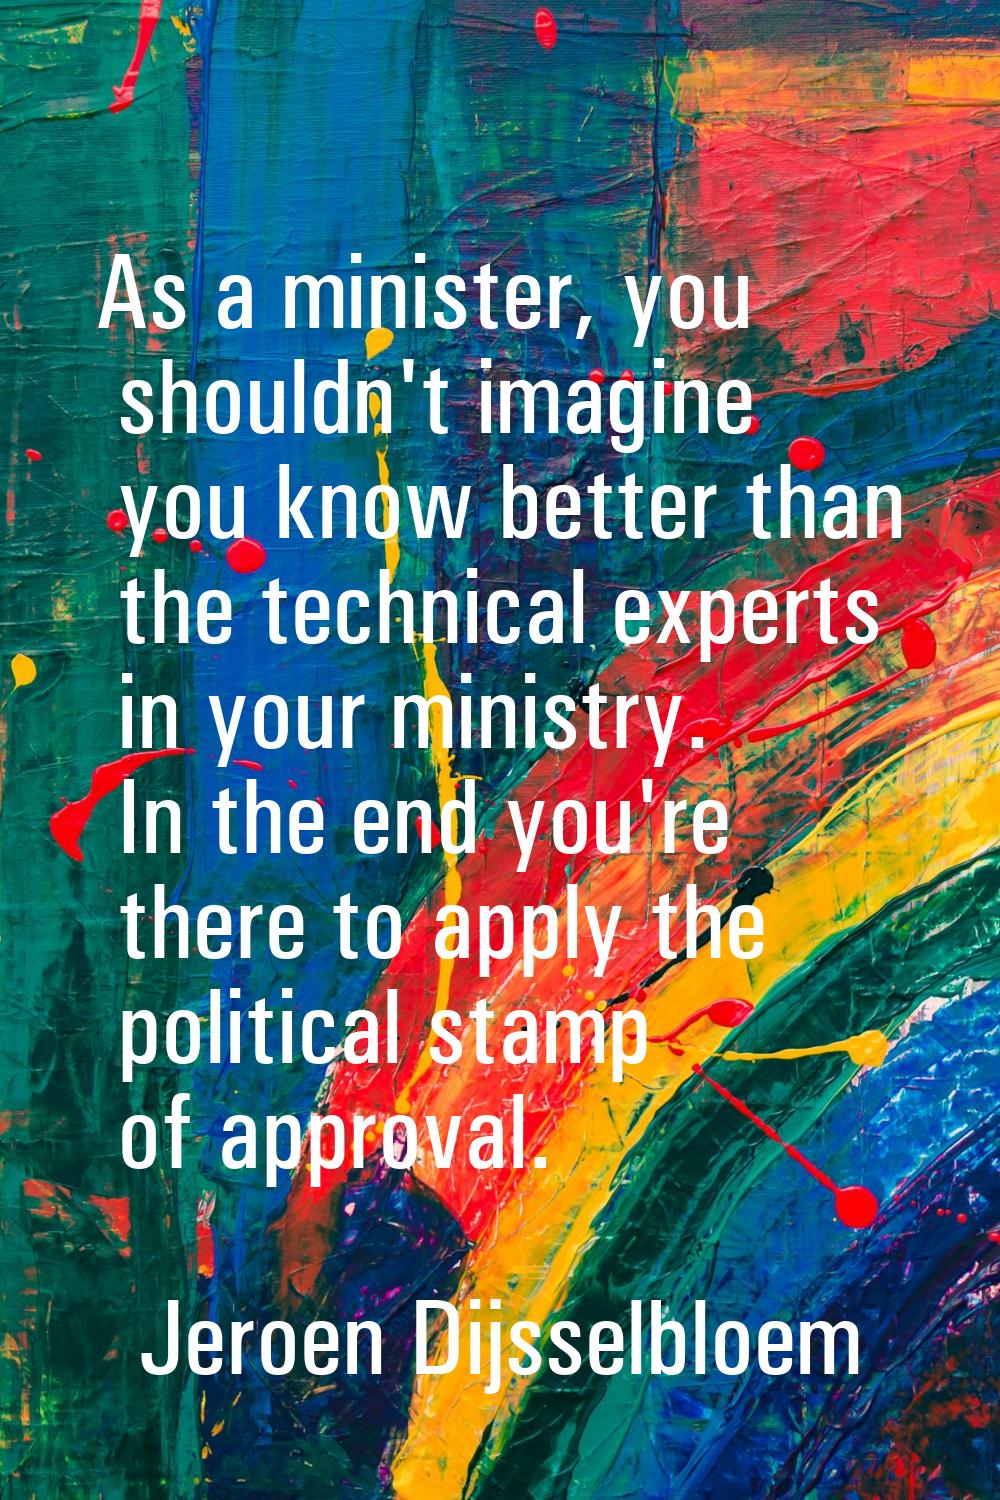 As a minister, you shouldn't imagine you know better than the technical experts in your ministry. I